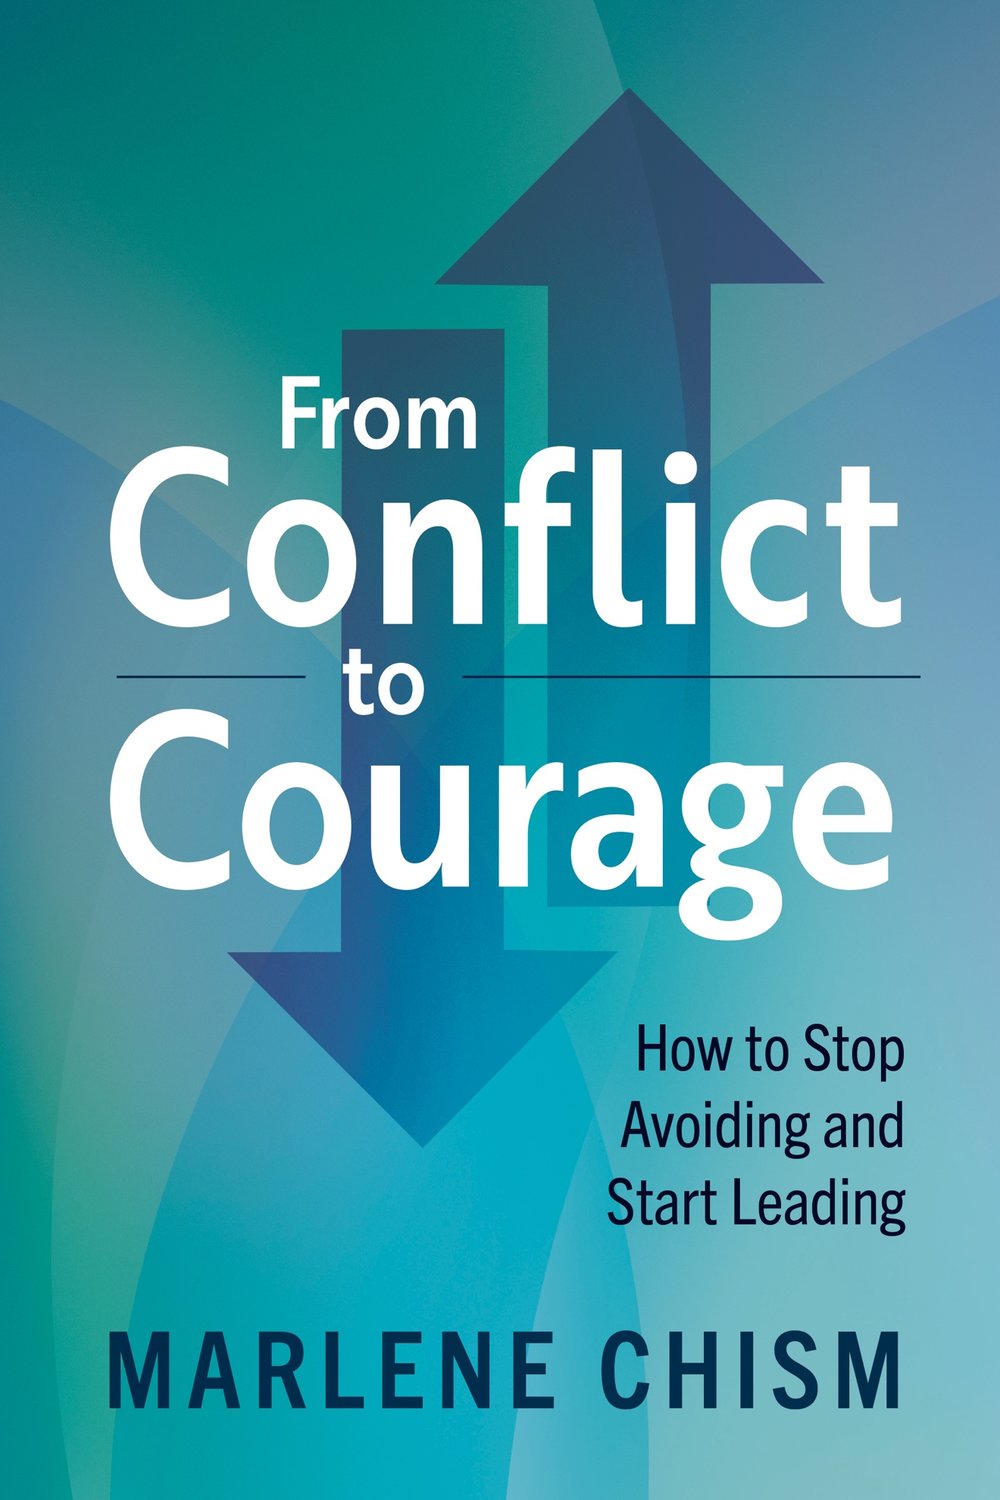 &ldquo;Conflict to Courage: How to Stop Avoiding and Start Leading&rdquo;by Marlene Chism$19.95 (paperback), 240 pagesBerrett-Koehler Publishers, May 3, 2022